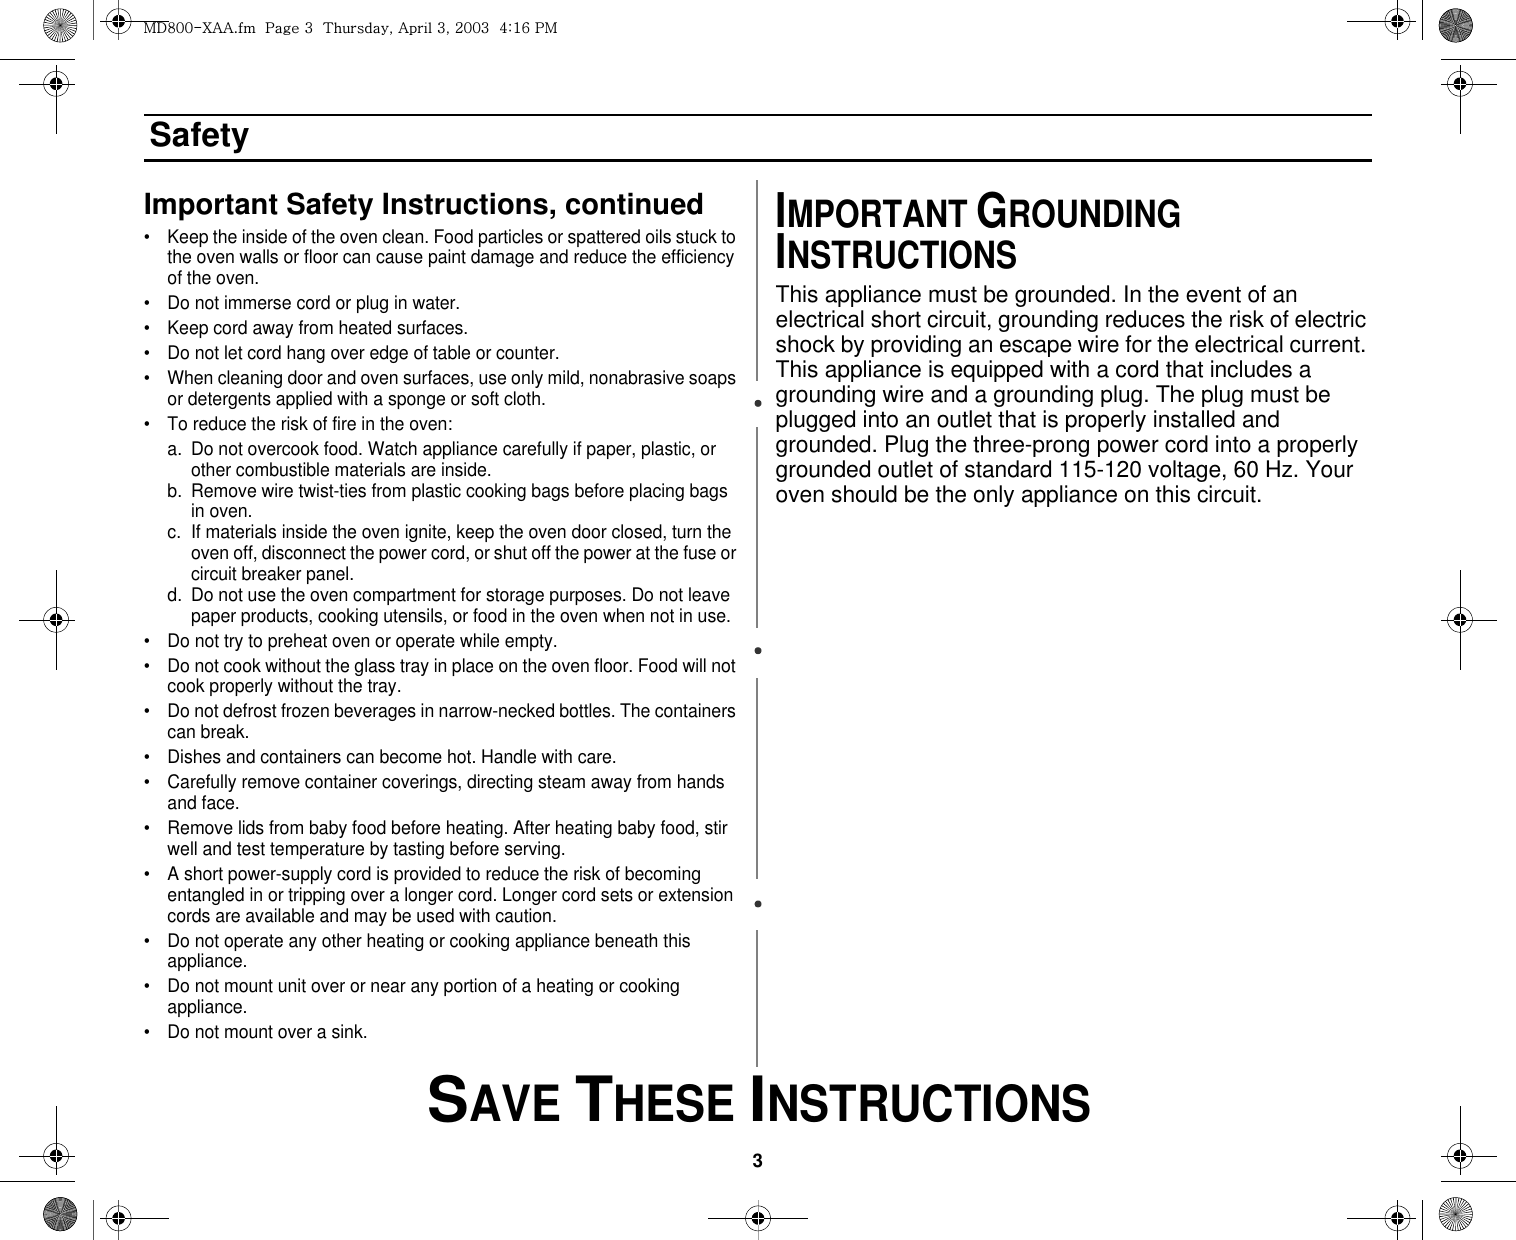 3 SAVE THESE INSTRUCTIONSSafetyImportant Safety Instructions, continued• Keep the inside of the oven clean. Food particles or spattered oils stuck to the oven walls or floor can cause paint damage and reduce the efficiency of the oven.• Do not immerse cord or plug in water.• Keep cord away from heated surfaces.• Do not let cord hang over edge of table or counter.• When cleaning door and oven surfaces, use only mild, nonabrasive soaps or detergents applied with a sponge or soft cloth.• To reduce the risk of fire in the oven:a. Do not overcook food. Watch appliance carefully if paper, plastic, or other combustible materials are inside.b. Remove wire twist-ties from plastic cooking bags before placing bags in oven.c. If materials inside the oven ignite, keep the oven door closed, turn the oven off, disconnect the power cord, or shut off the power at the fuse or circuit breaker panel.d. Do not use the oven compartment for storage purposes. Do not leave paper products, cooking utensils, or food in the oven when not in use.• Do not try to preheat oven or operate while empty.• Do not cook without the glass tray in place on the oven floor. Food will not cook properly without the tray.• Do not defrost frozen beverages in narrow-necked bottles. The containers can break.• Dishes and containers can become hot. Handle with care.• Carefully remove container coverings, directing steam away from hands and face.• Remove lids from baby food before heating. After heating baby food, stir well and test temperature by tasting before serving.• A short power-supply cord is provided to reduce the risk of becoming entangled in or tripping over a longer cord. Longer cord sets or extension cords are available and may be used with caution. • Do not operate any other heating or cooking appliance beneath this appliance.• Do not mount unit over or near any portion of a heating or cooking appliance.• Do not mount over a sink.IMPORTANT GROUNDING INSTRUCTIONSThis appliance must be grounded. In the event of an electrical short circuit, grounding reduces the risk of electric shock by providing an escape wire for the electrical current. This appliance is equipped with a cord that includes a grounding wire and a grounding plug. The plug must be plugged into an outlet that is properly installed and grounded. Plug the three-prong power cord into a properly grounded outlet of standard 115-120 voltage, 60 Hz. Your oven should be the only appliance on this circuit.tk_WWThhUGGwGZGG{SGhGZSGYWWZGG[aX]Gwt